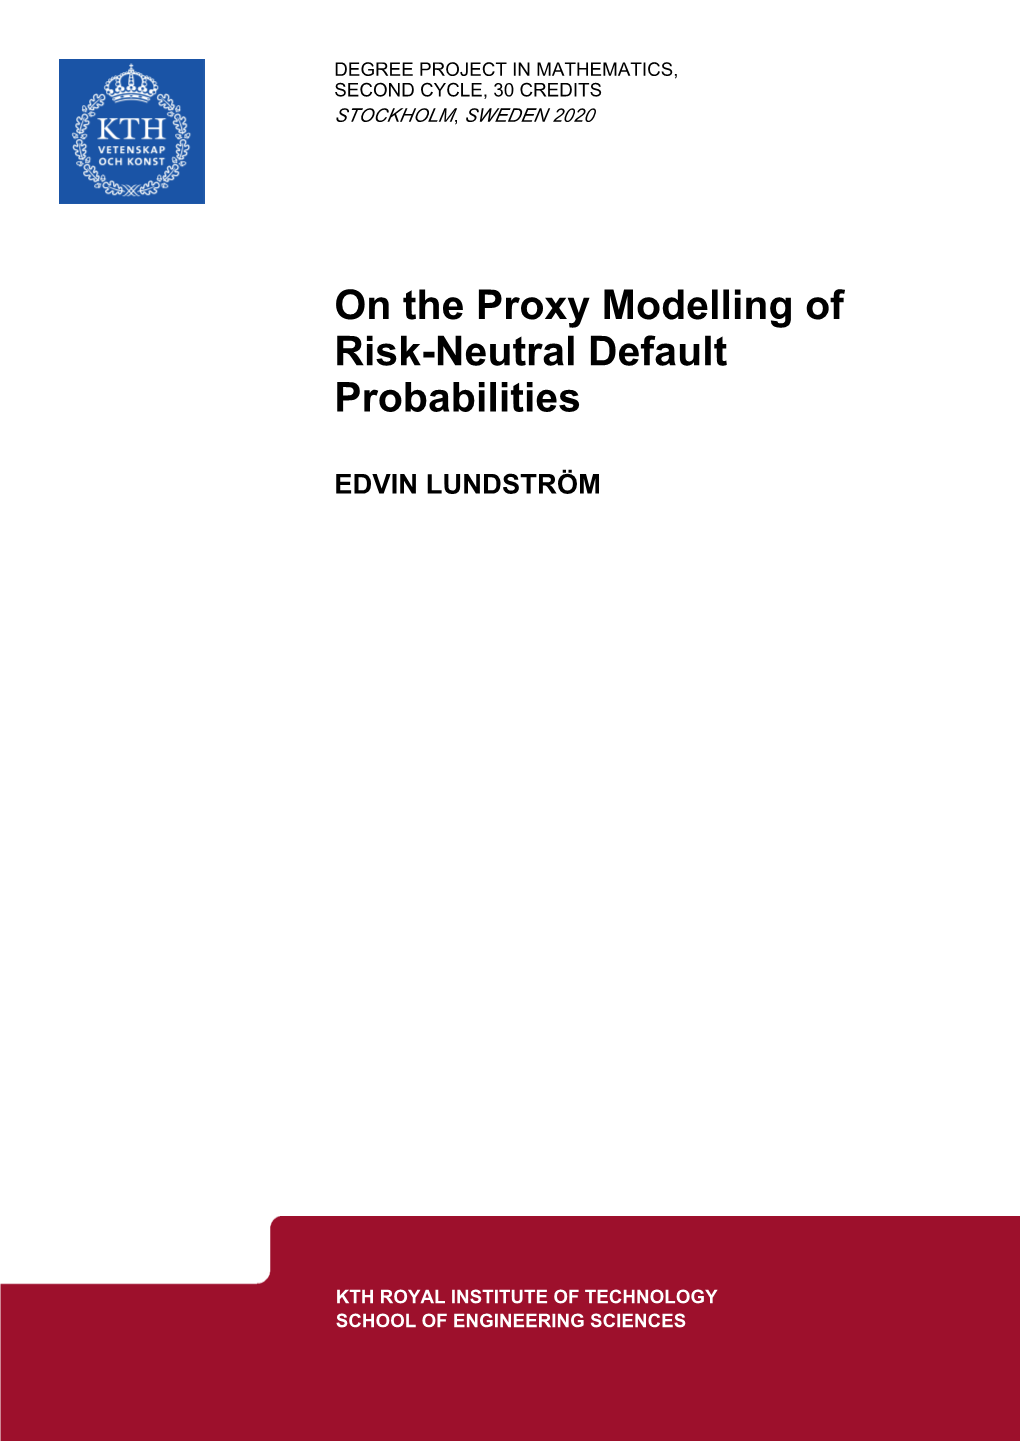 On the Proxy Modelling of Risk-Neutral Default Probabilities